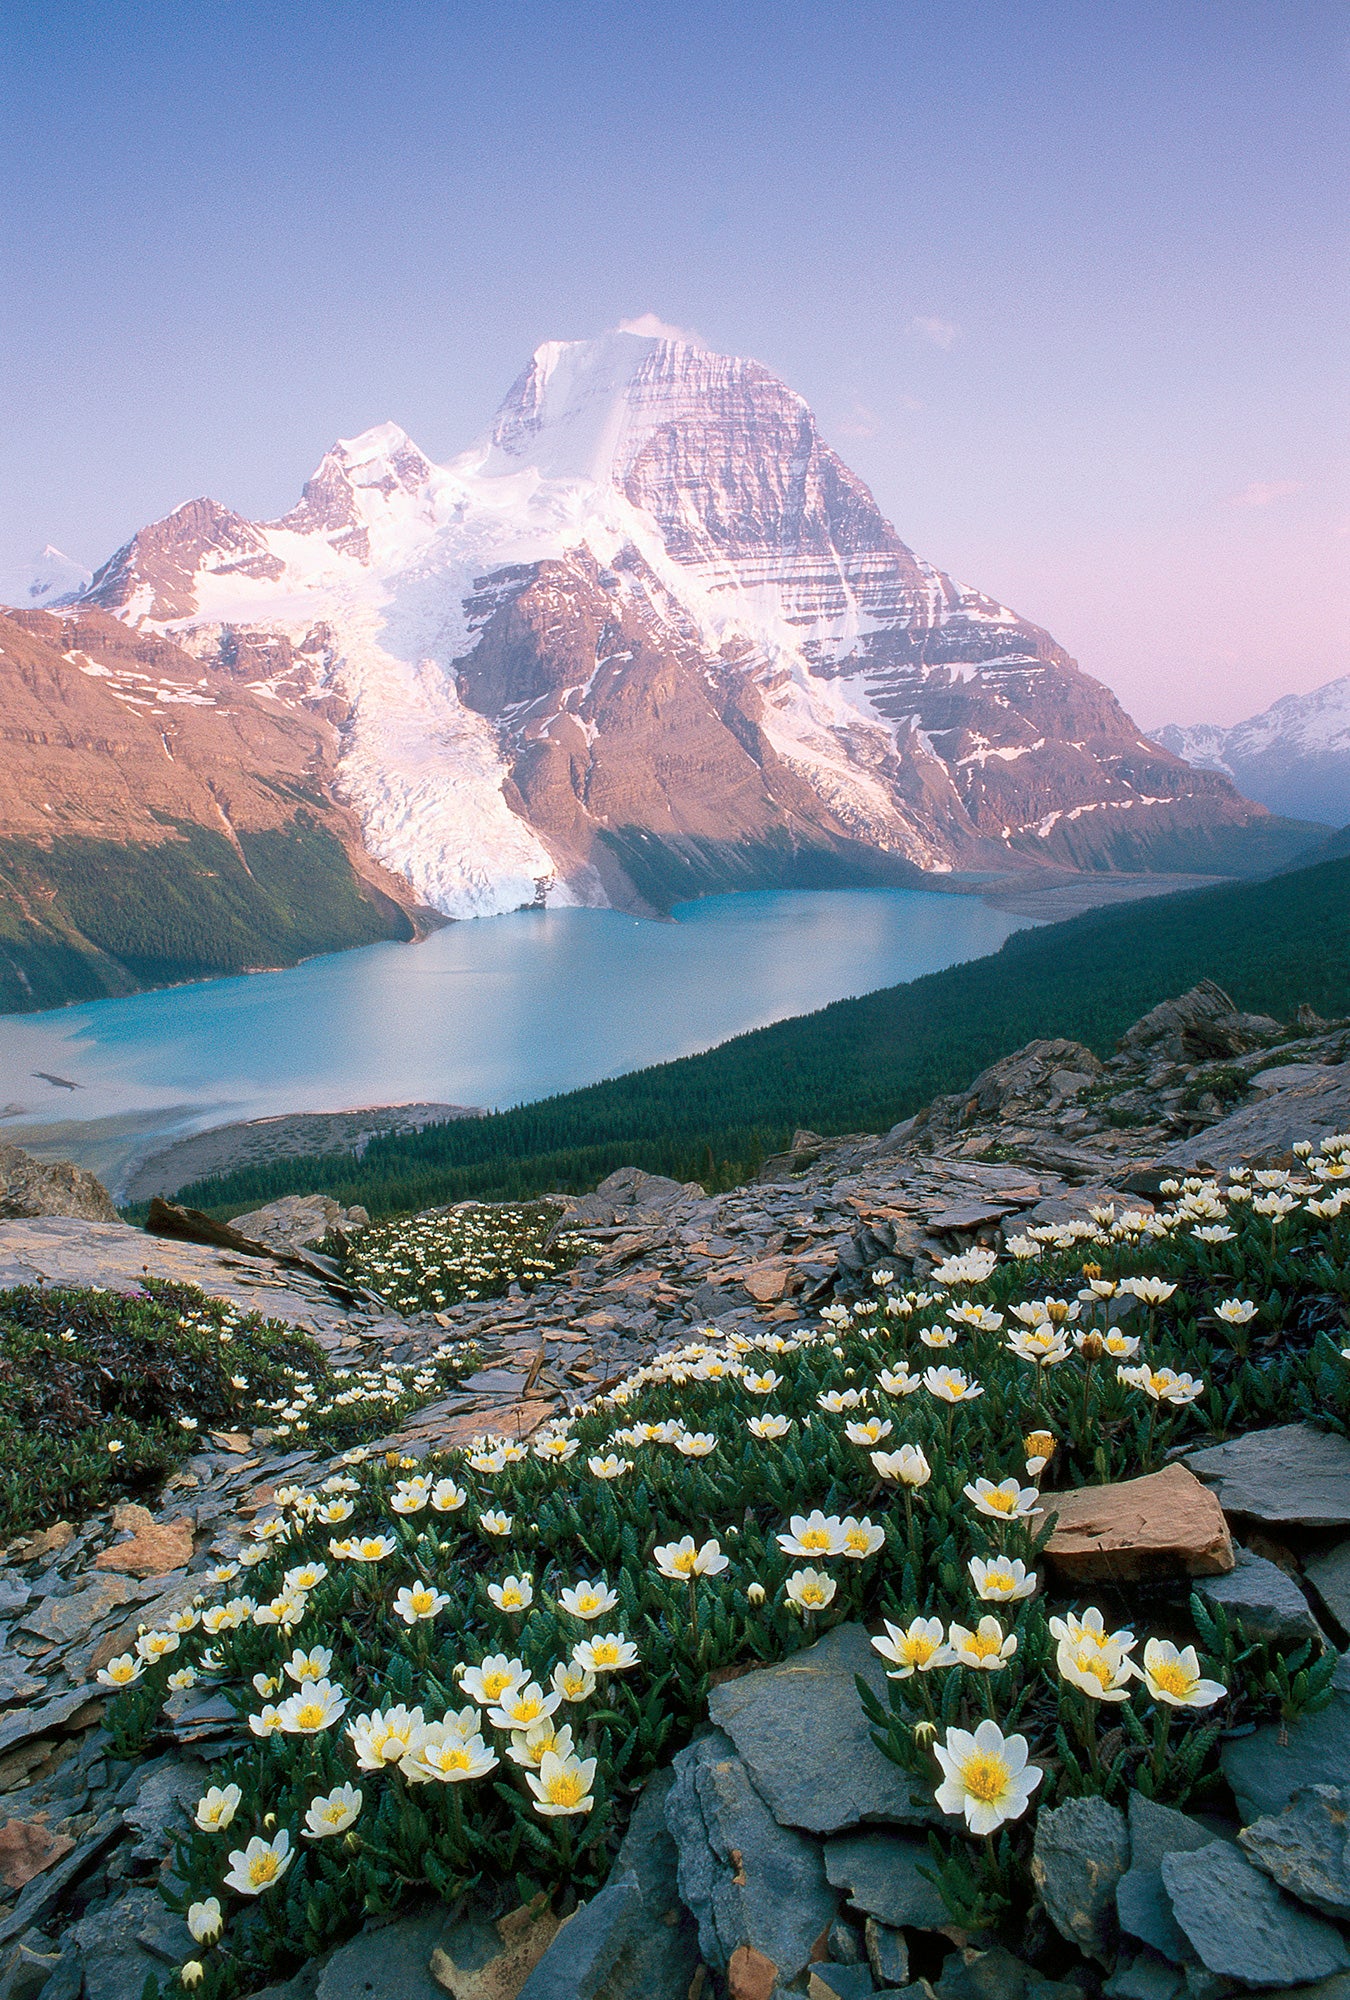 A mountain with flowers in front of it. End of image description.